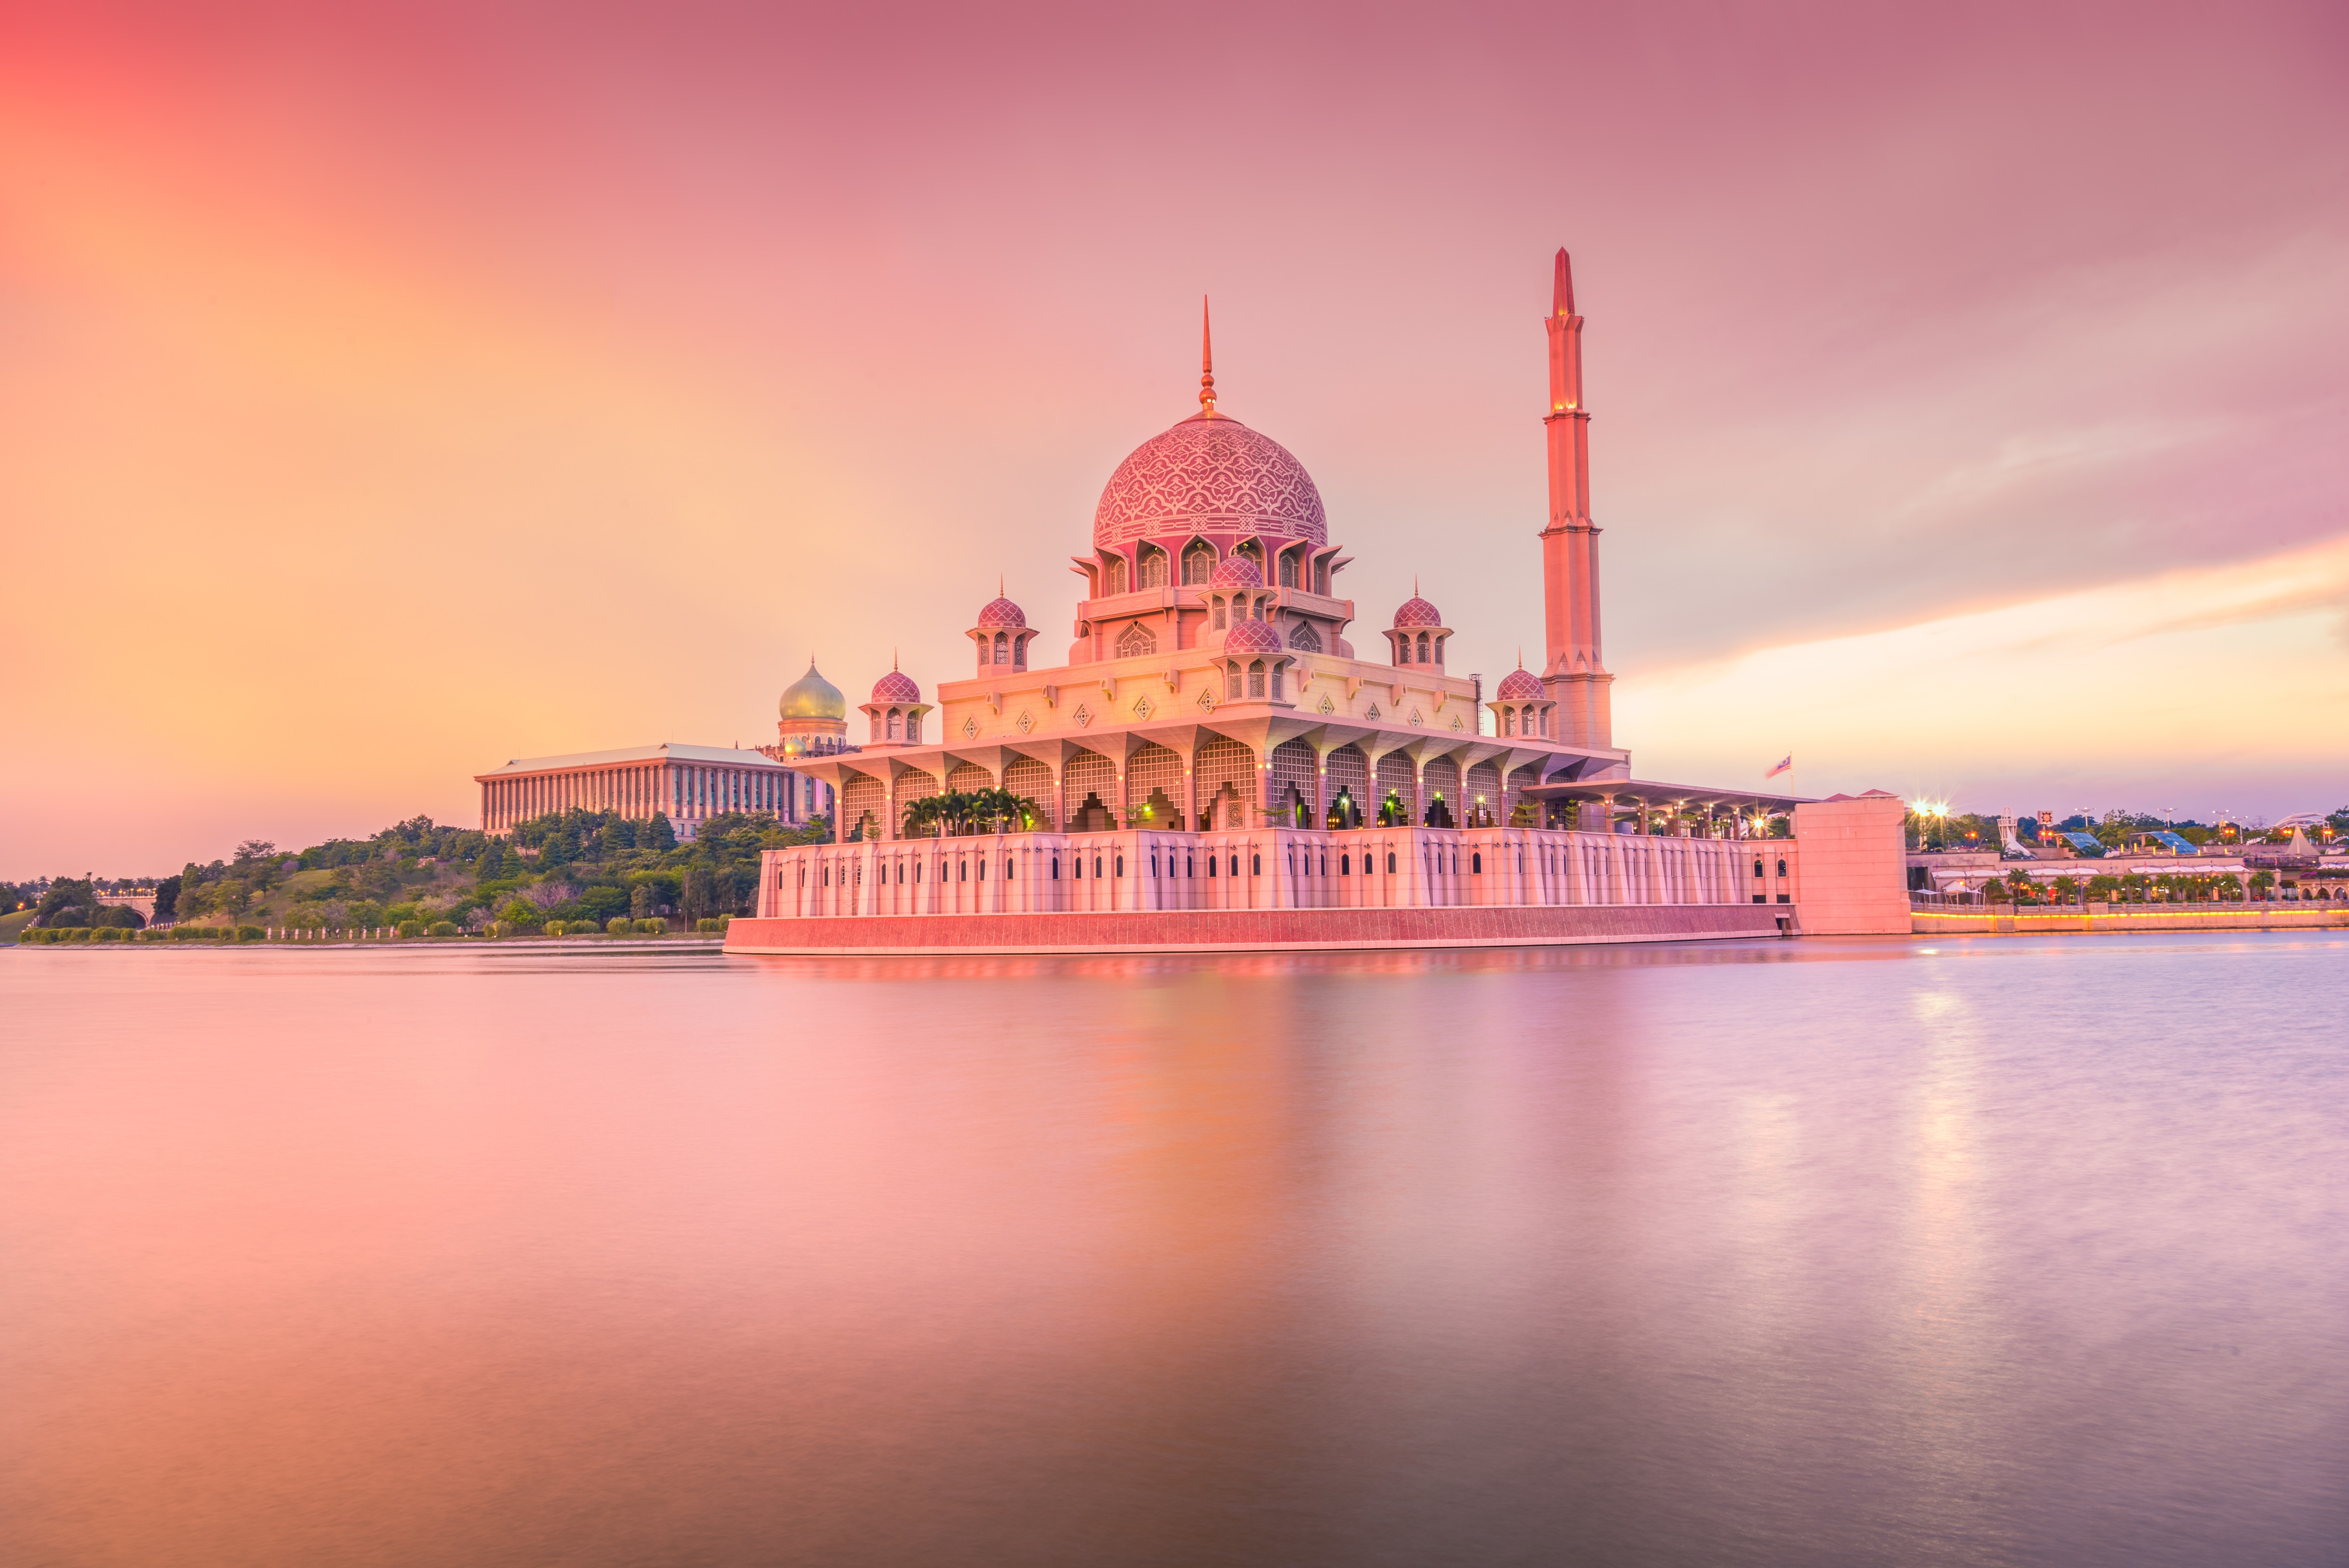 Planning a Trip to Kuala Lumpur? Here are 4 Most Beautiful Places to